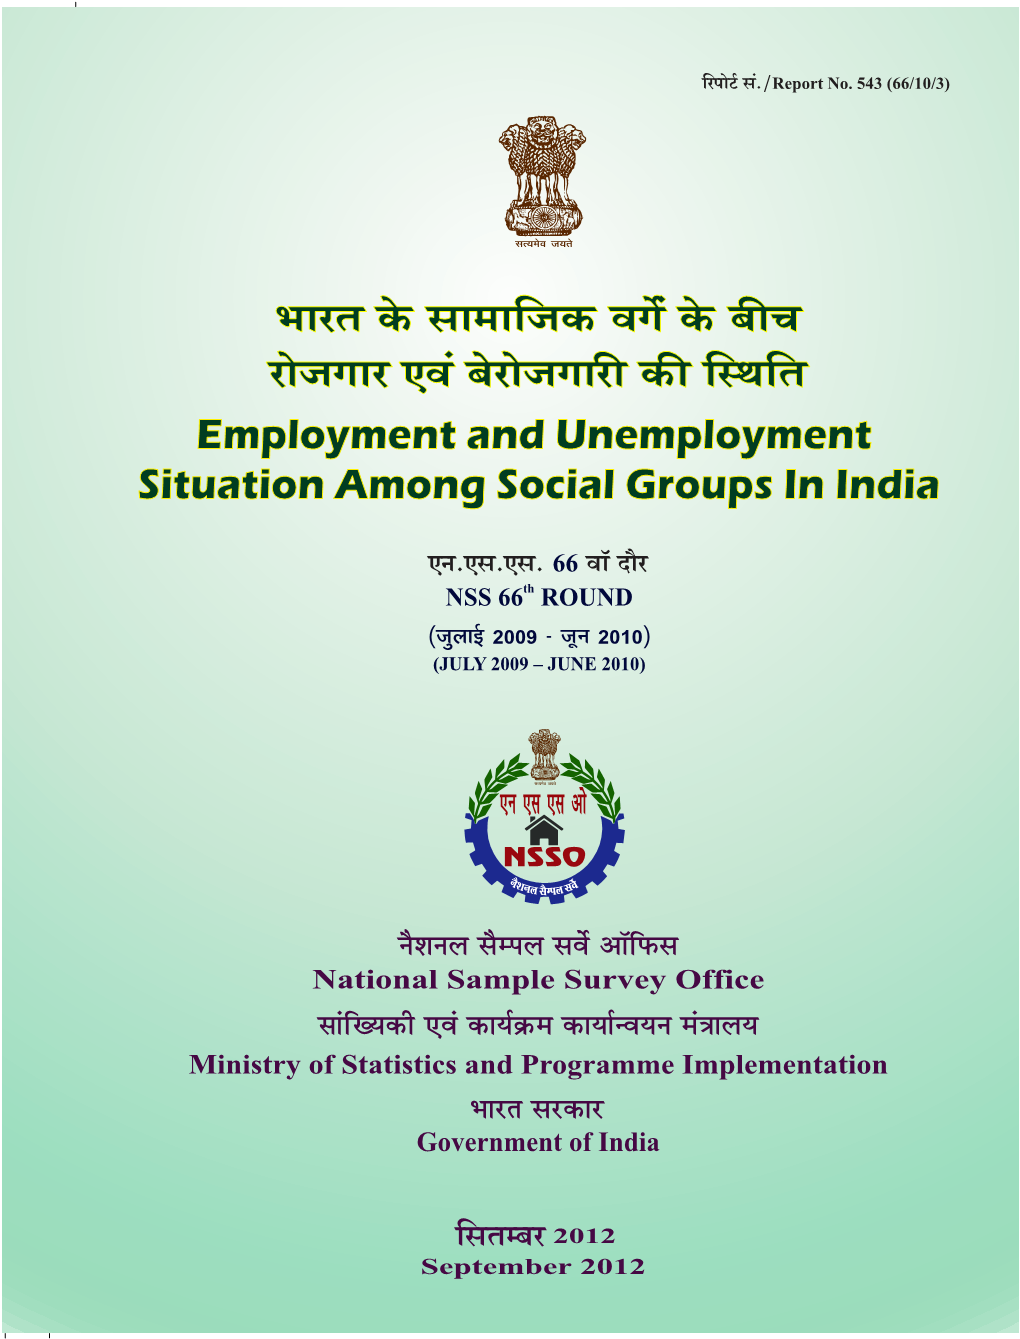 Employment and Unemployment Situation Among Social Groups in India